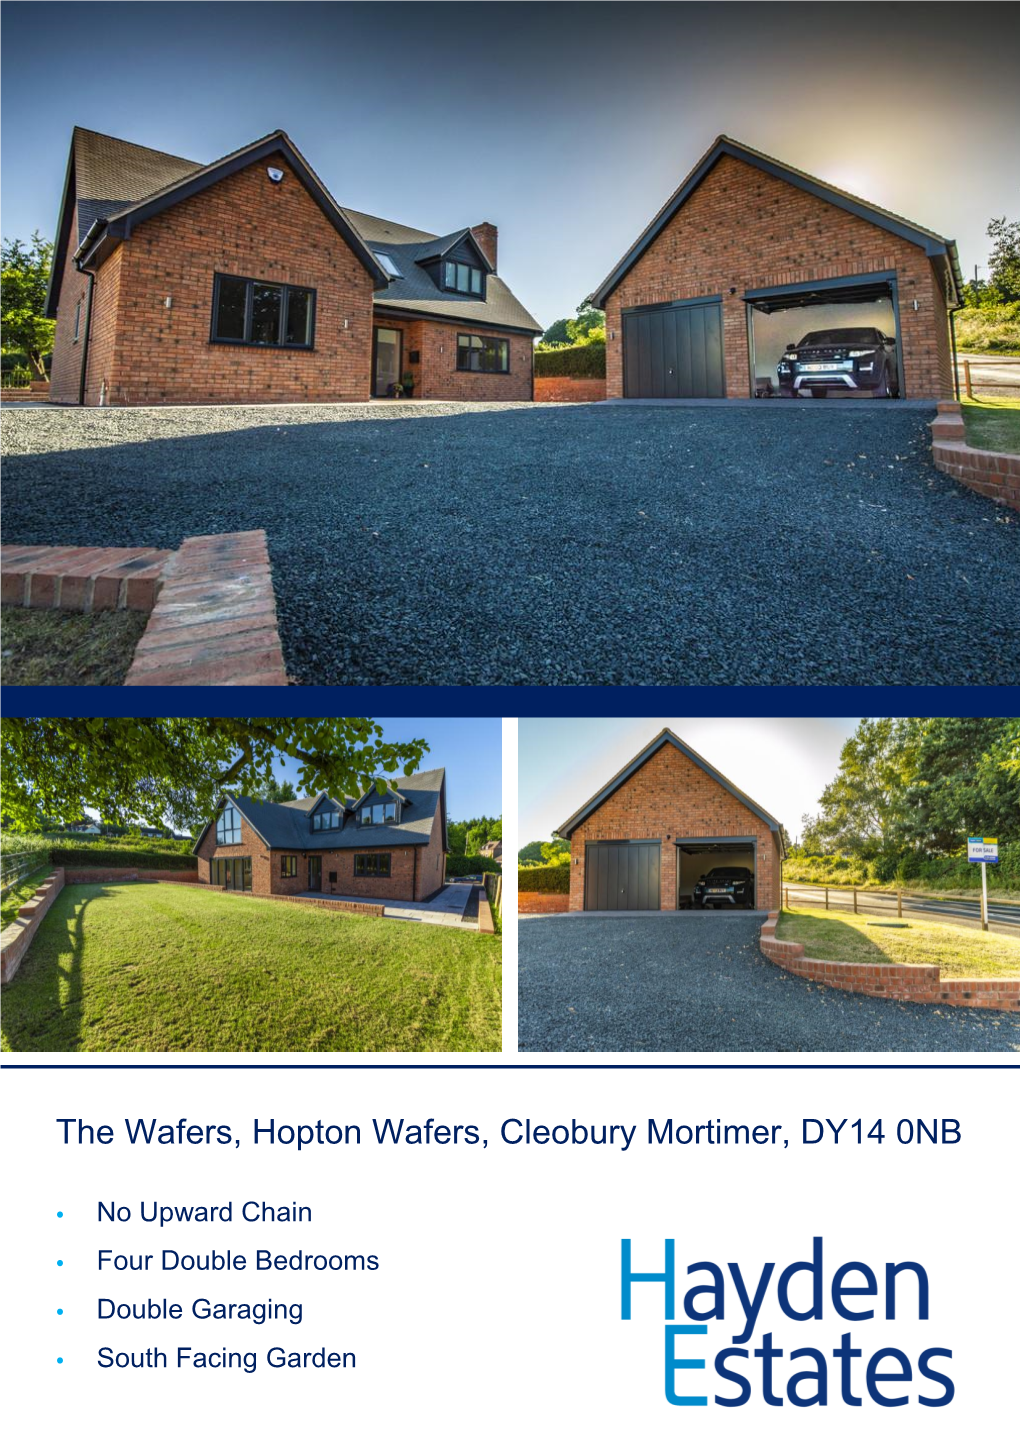 The Wafers, Hopton Wafers, Cleobury Mortimer, DY14 0NB